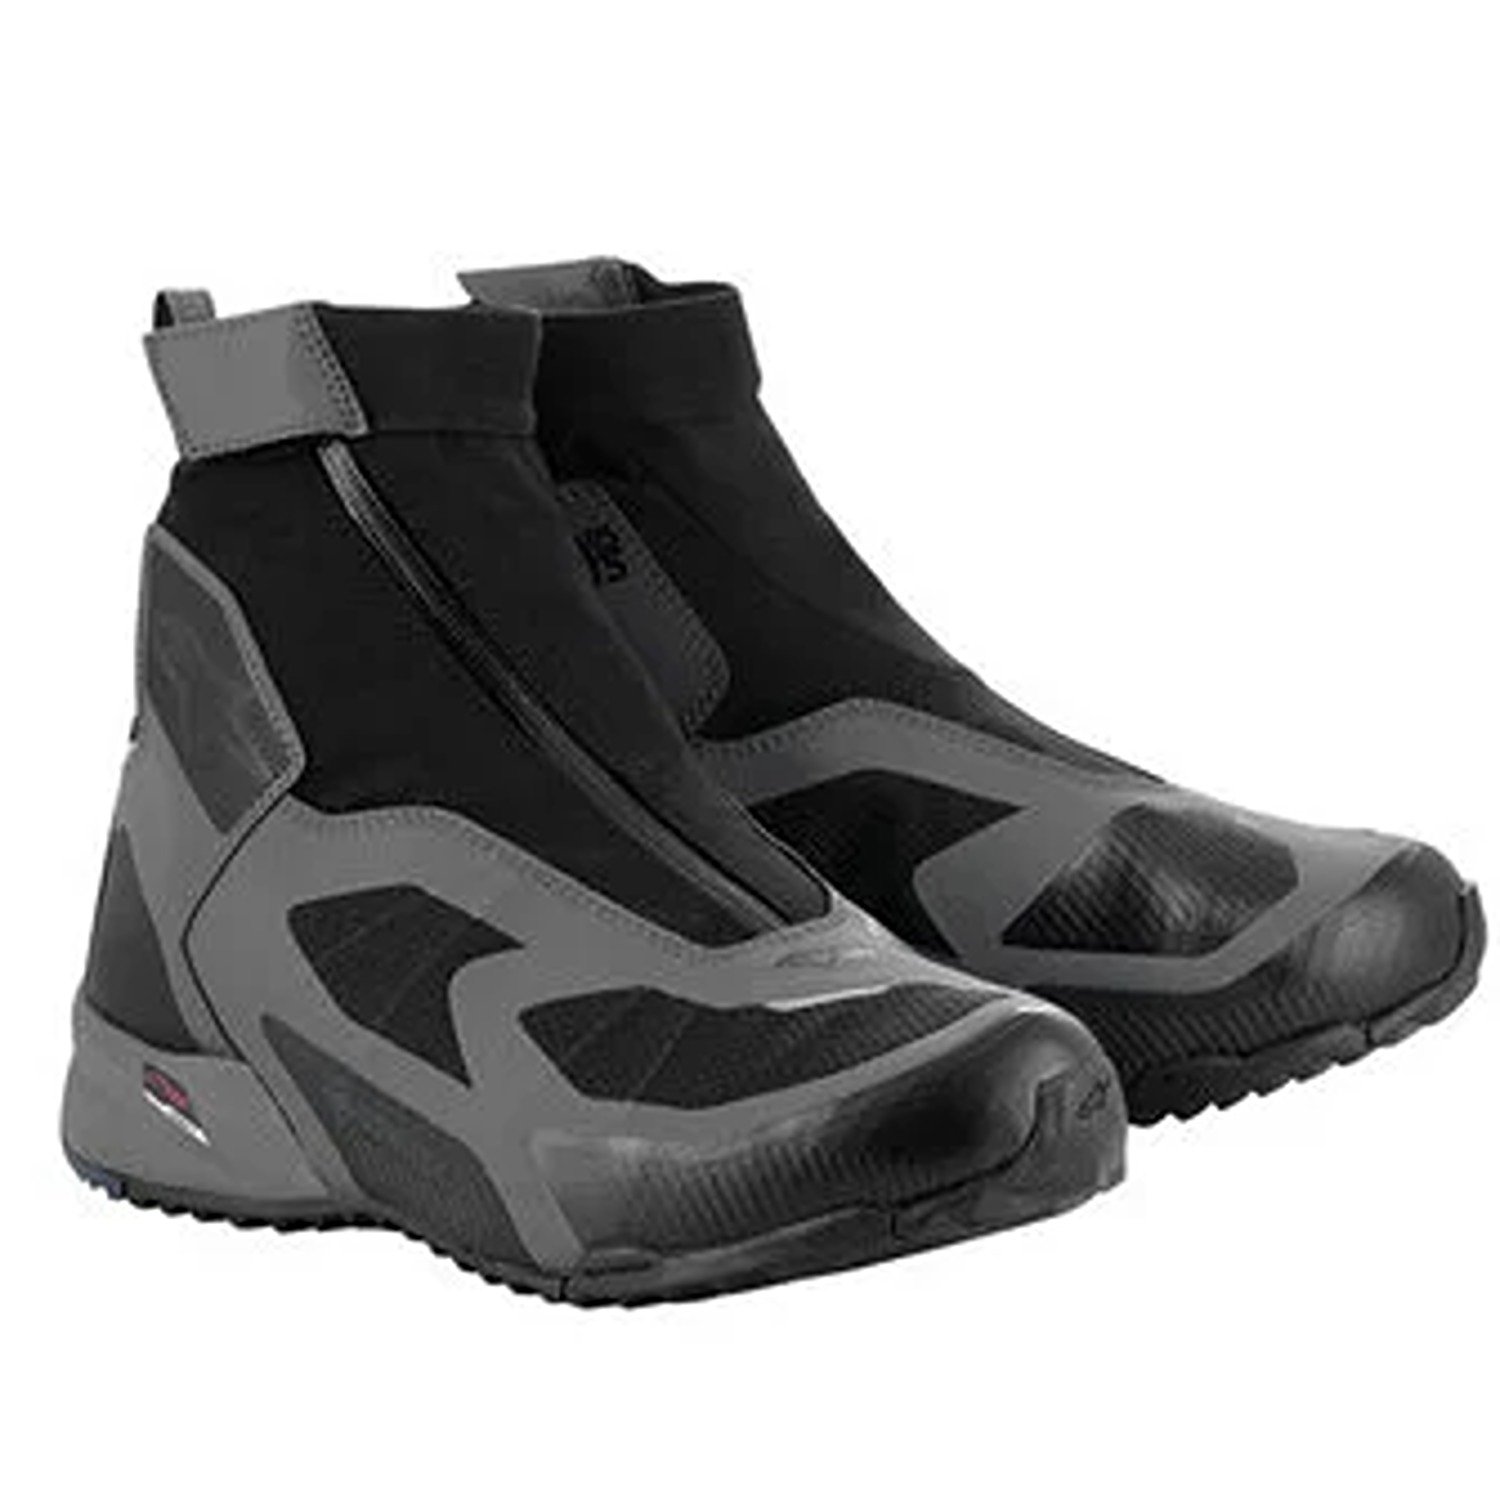 Image of Alpinestars CR-8 Gore-Tex Shoes Black Mid Gray Bright Red Size US 7 EN